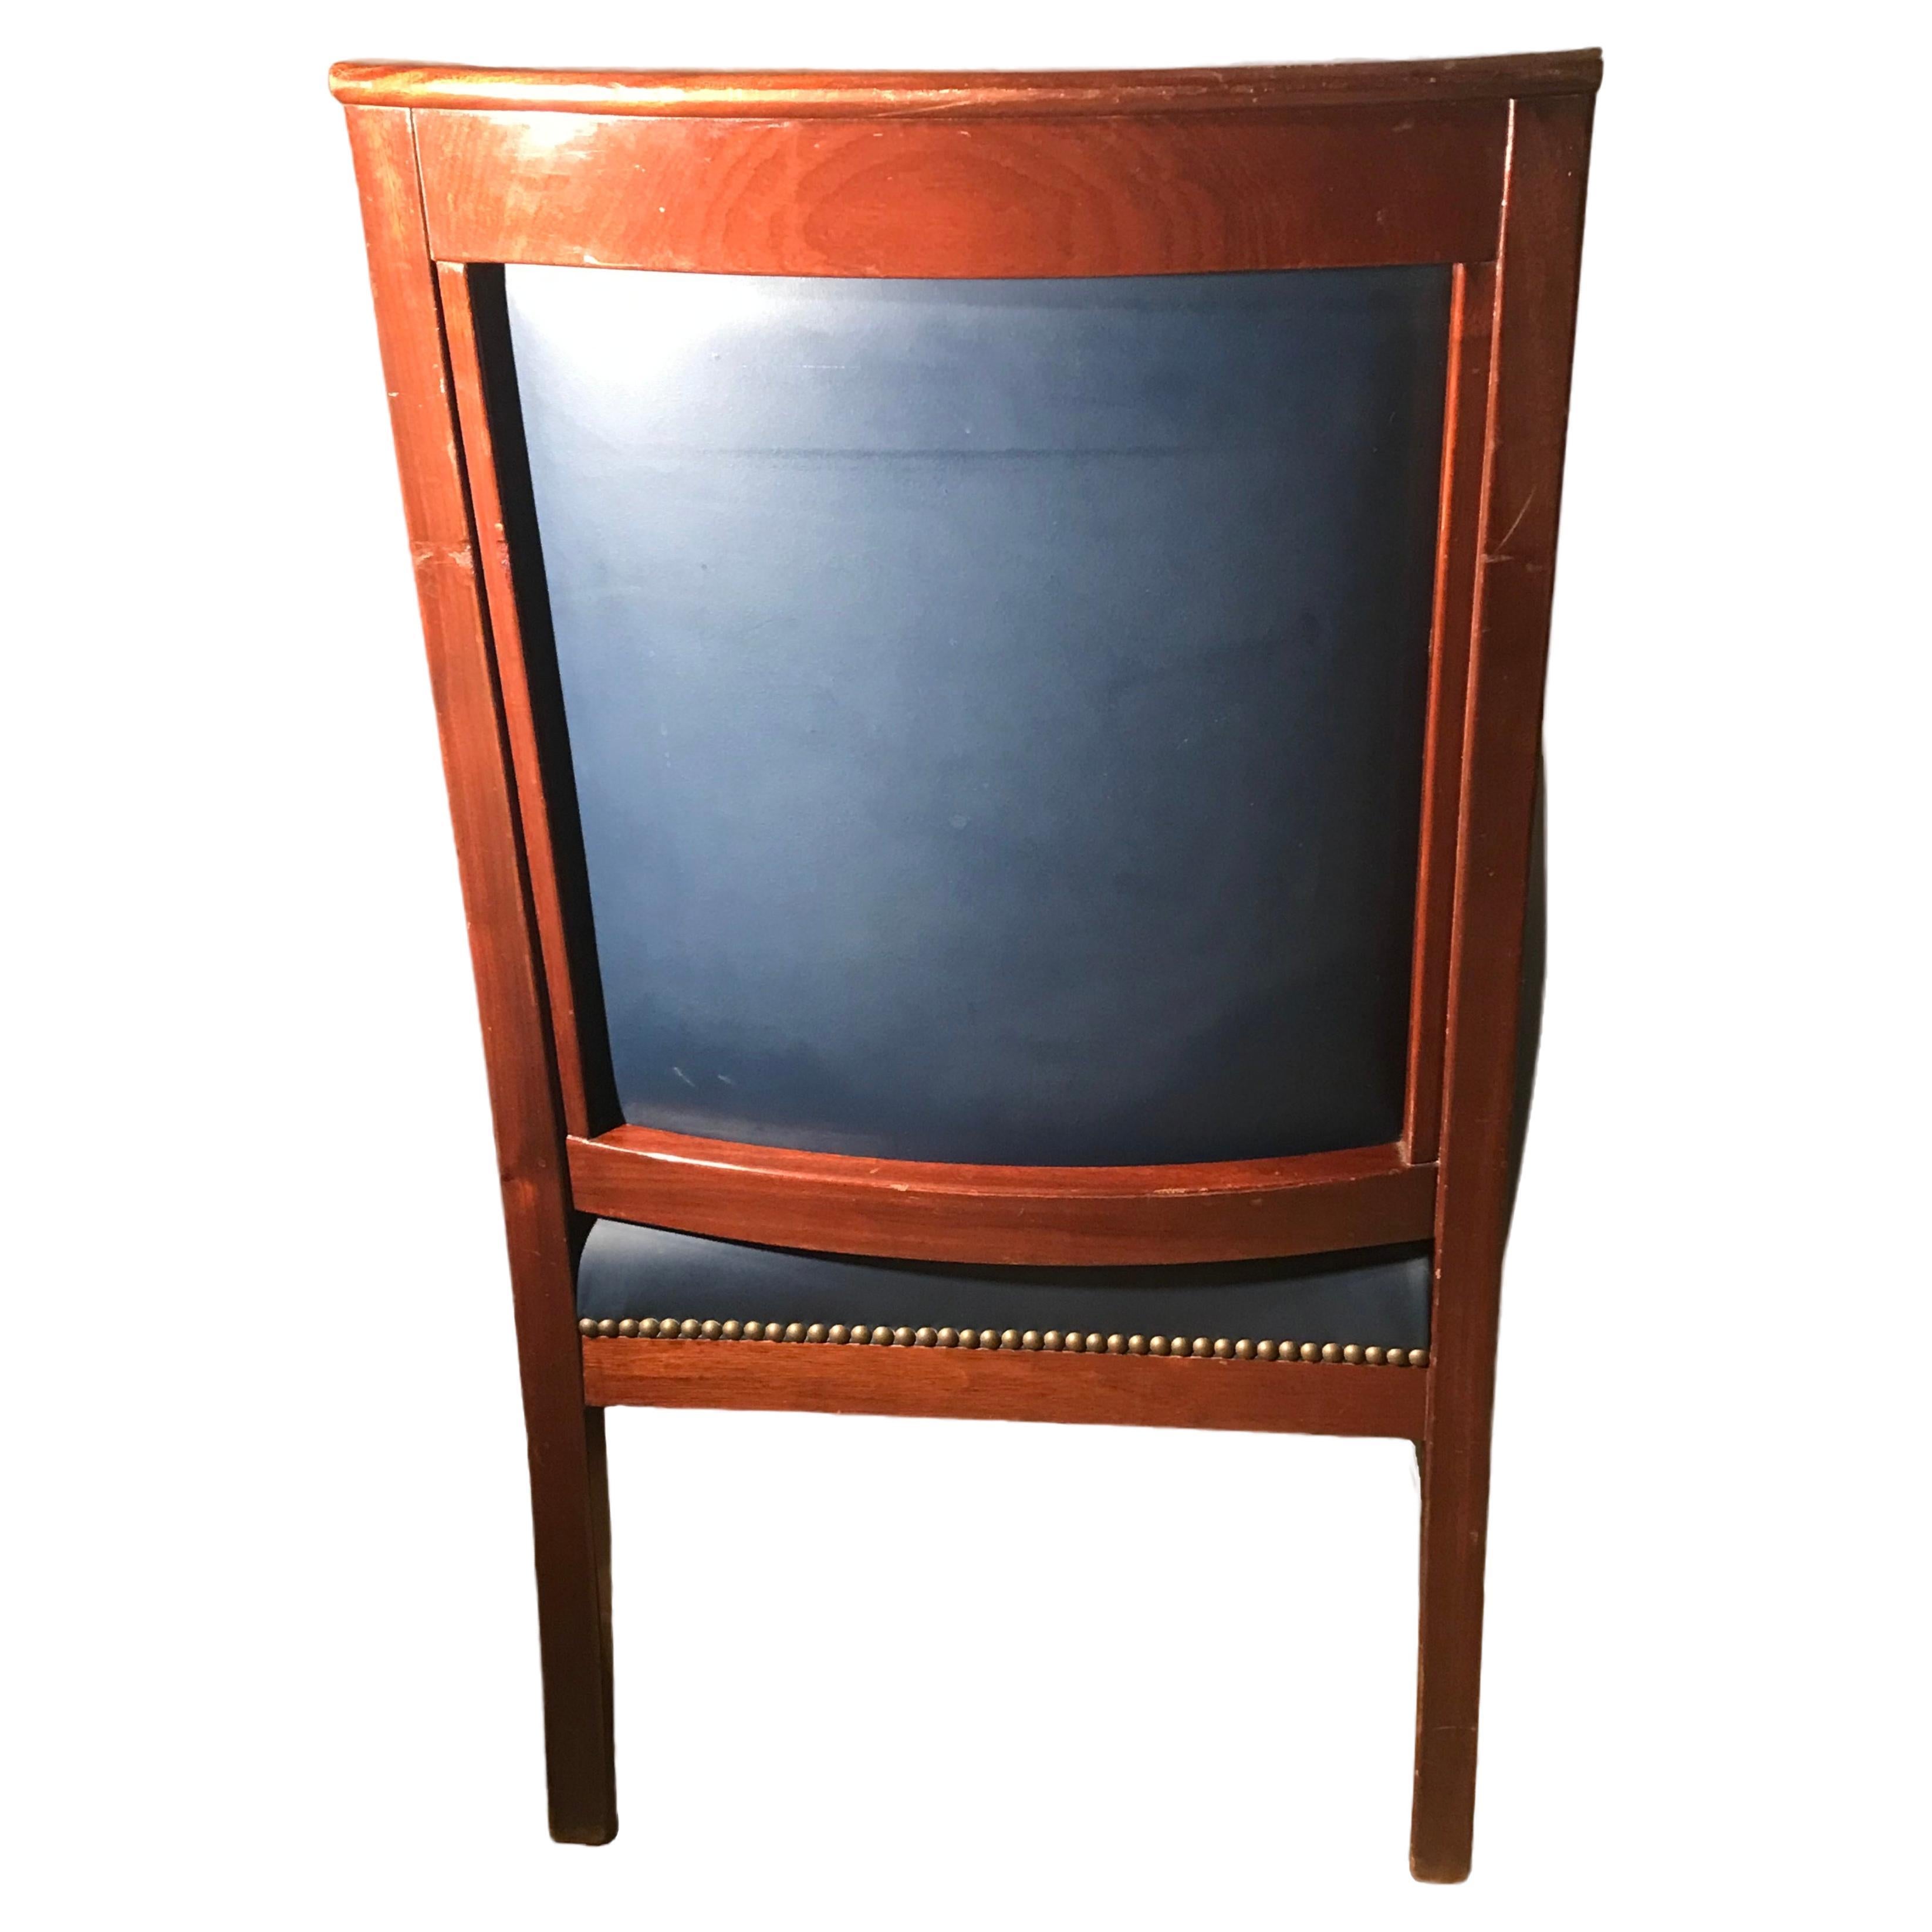 Explore our pretty French Restauration Armchair, crafted circa 1870-80. Adorned with intricate carvings, this armchair is constructed from luxurious Mahogany wood and features a stylish blue leather upholstery. In good original condition, this chair